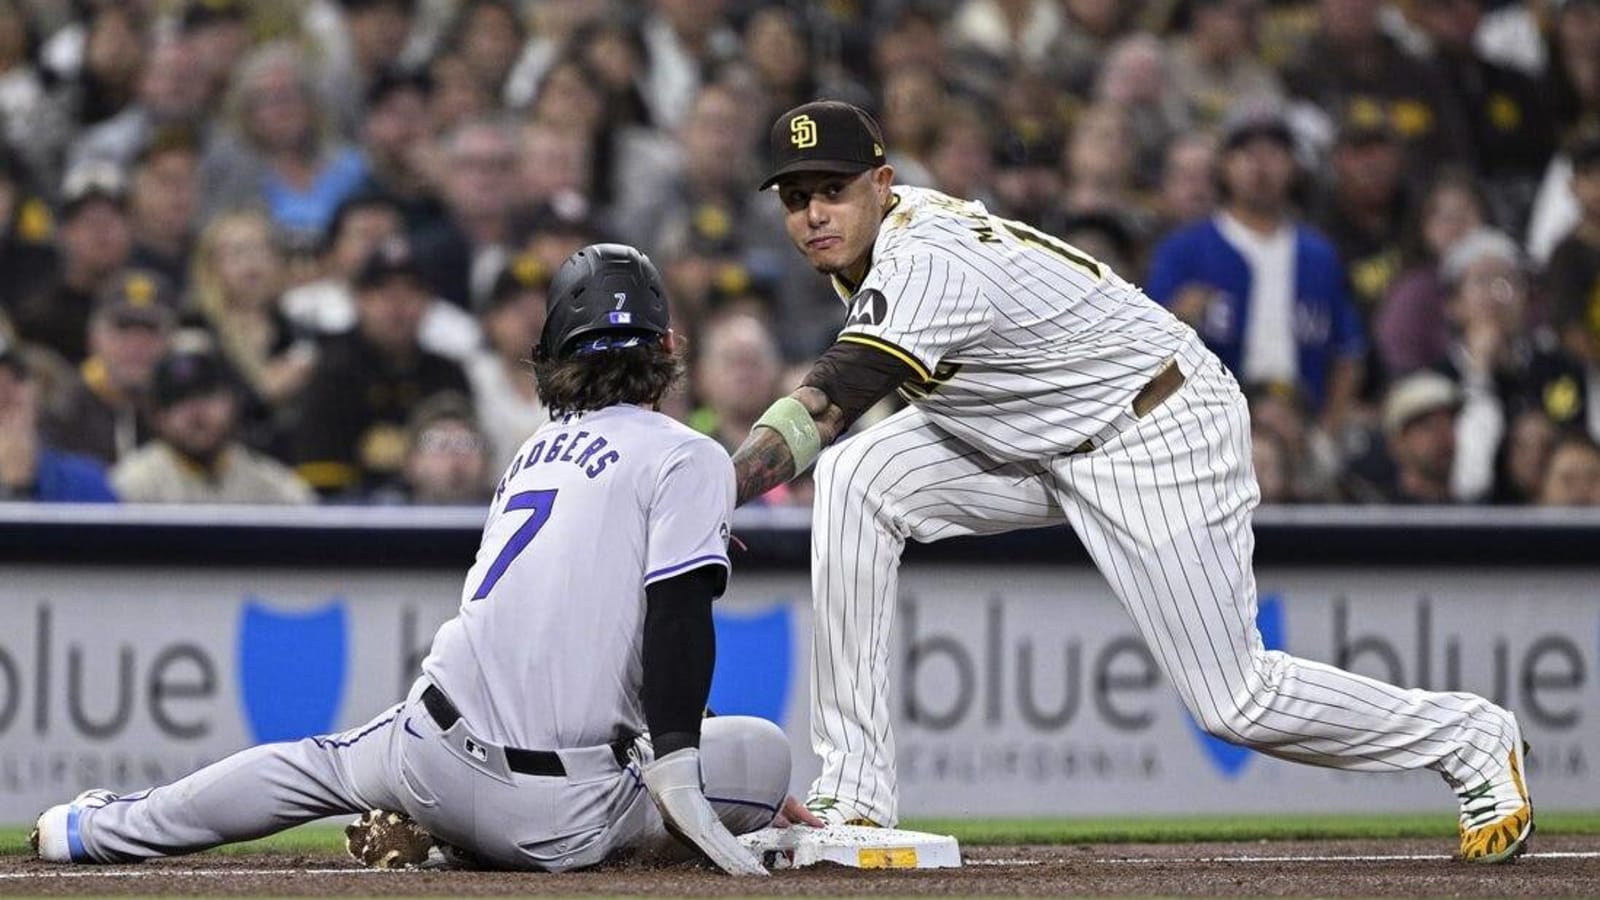 Newly aggressive Rockies pursue sweep of Padres